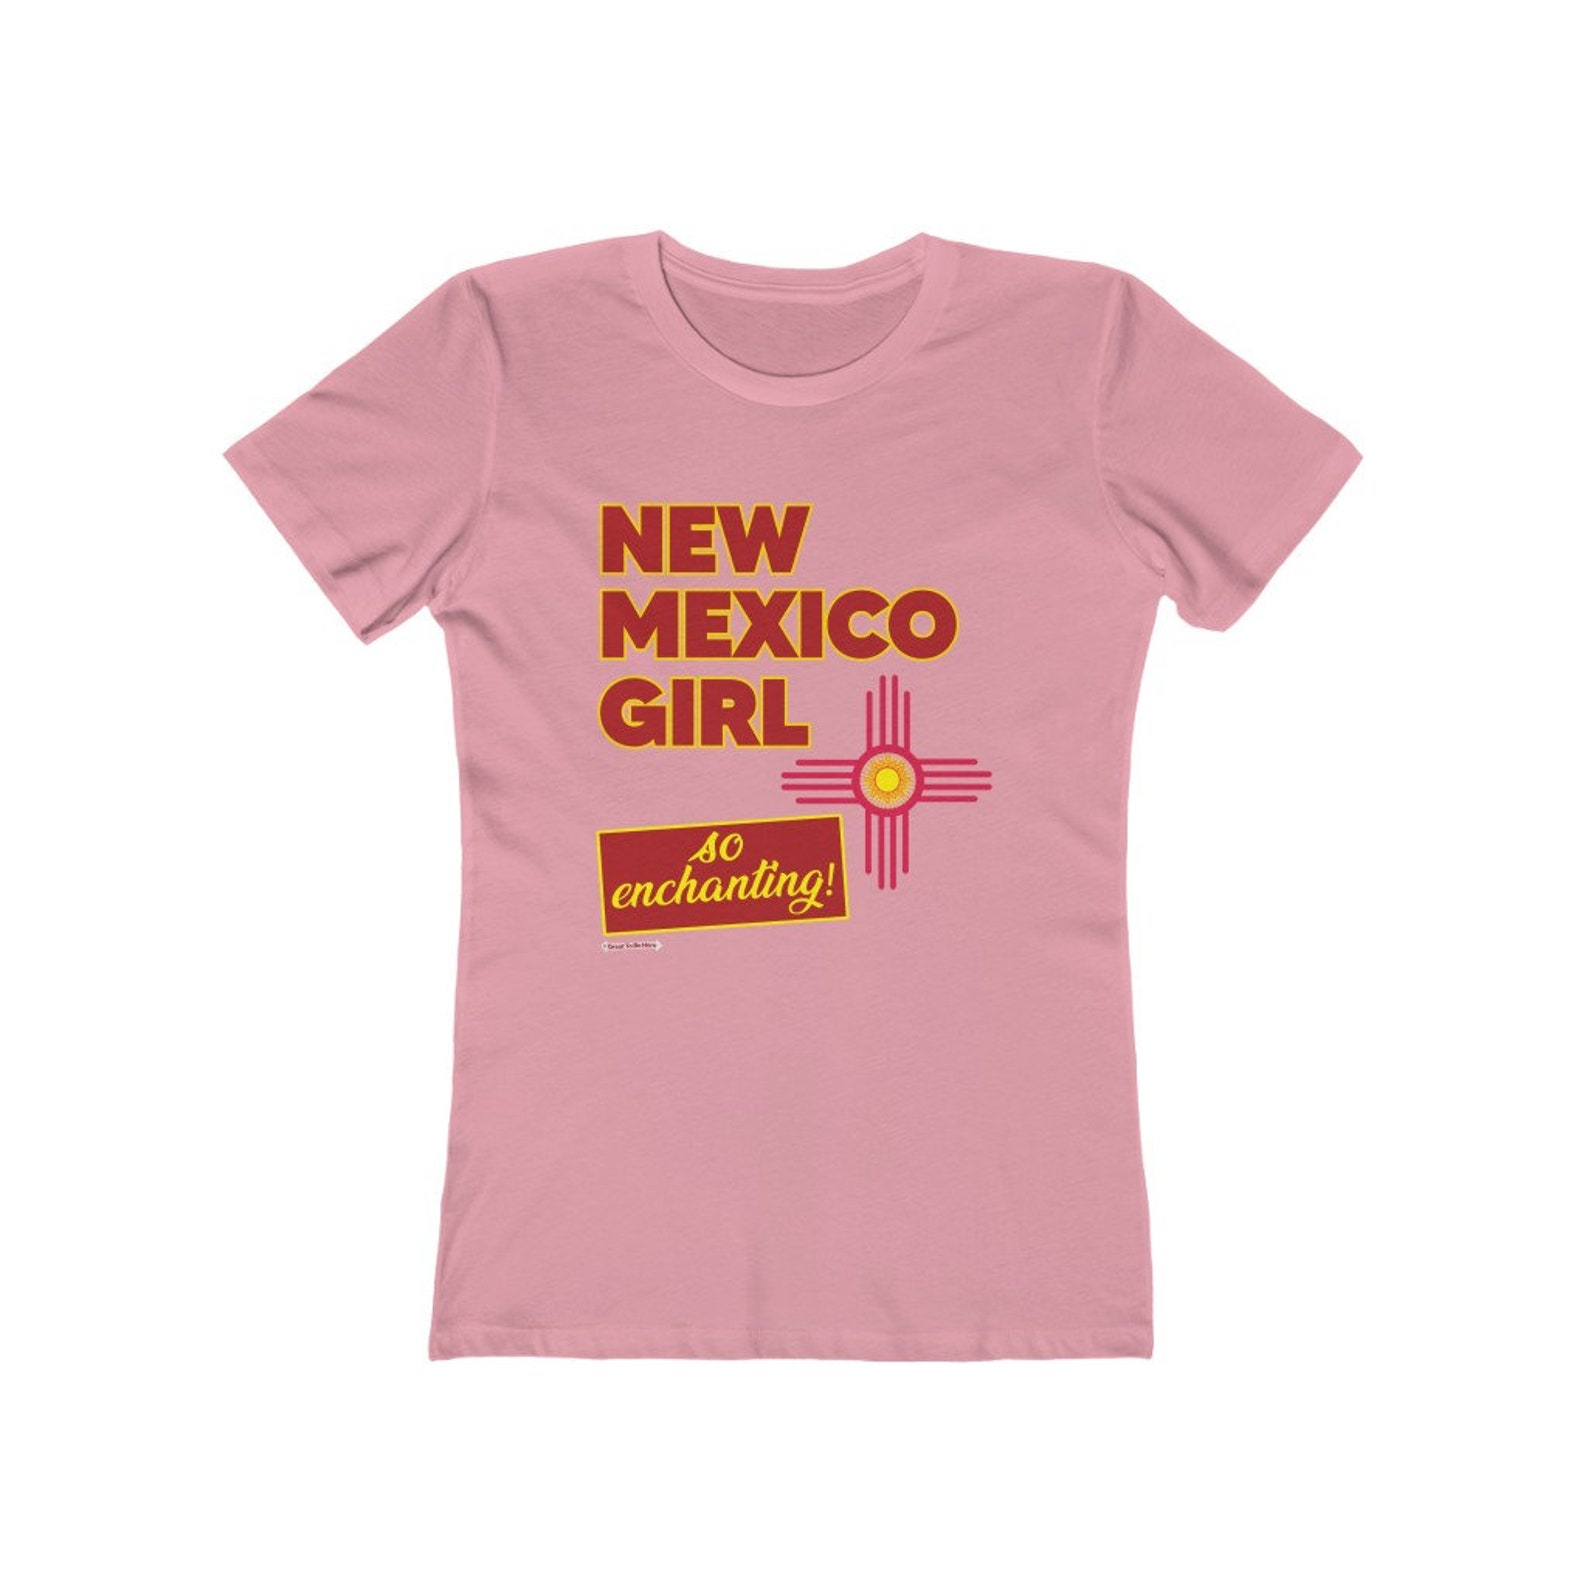 The New Mexico Girl Women's Fashion T-Shirt | Etsy